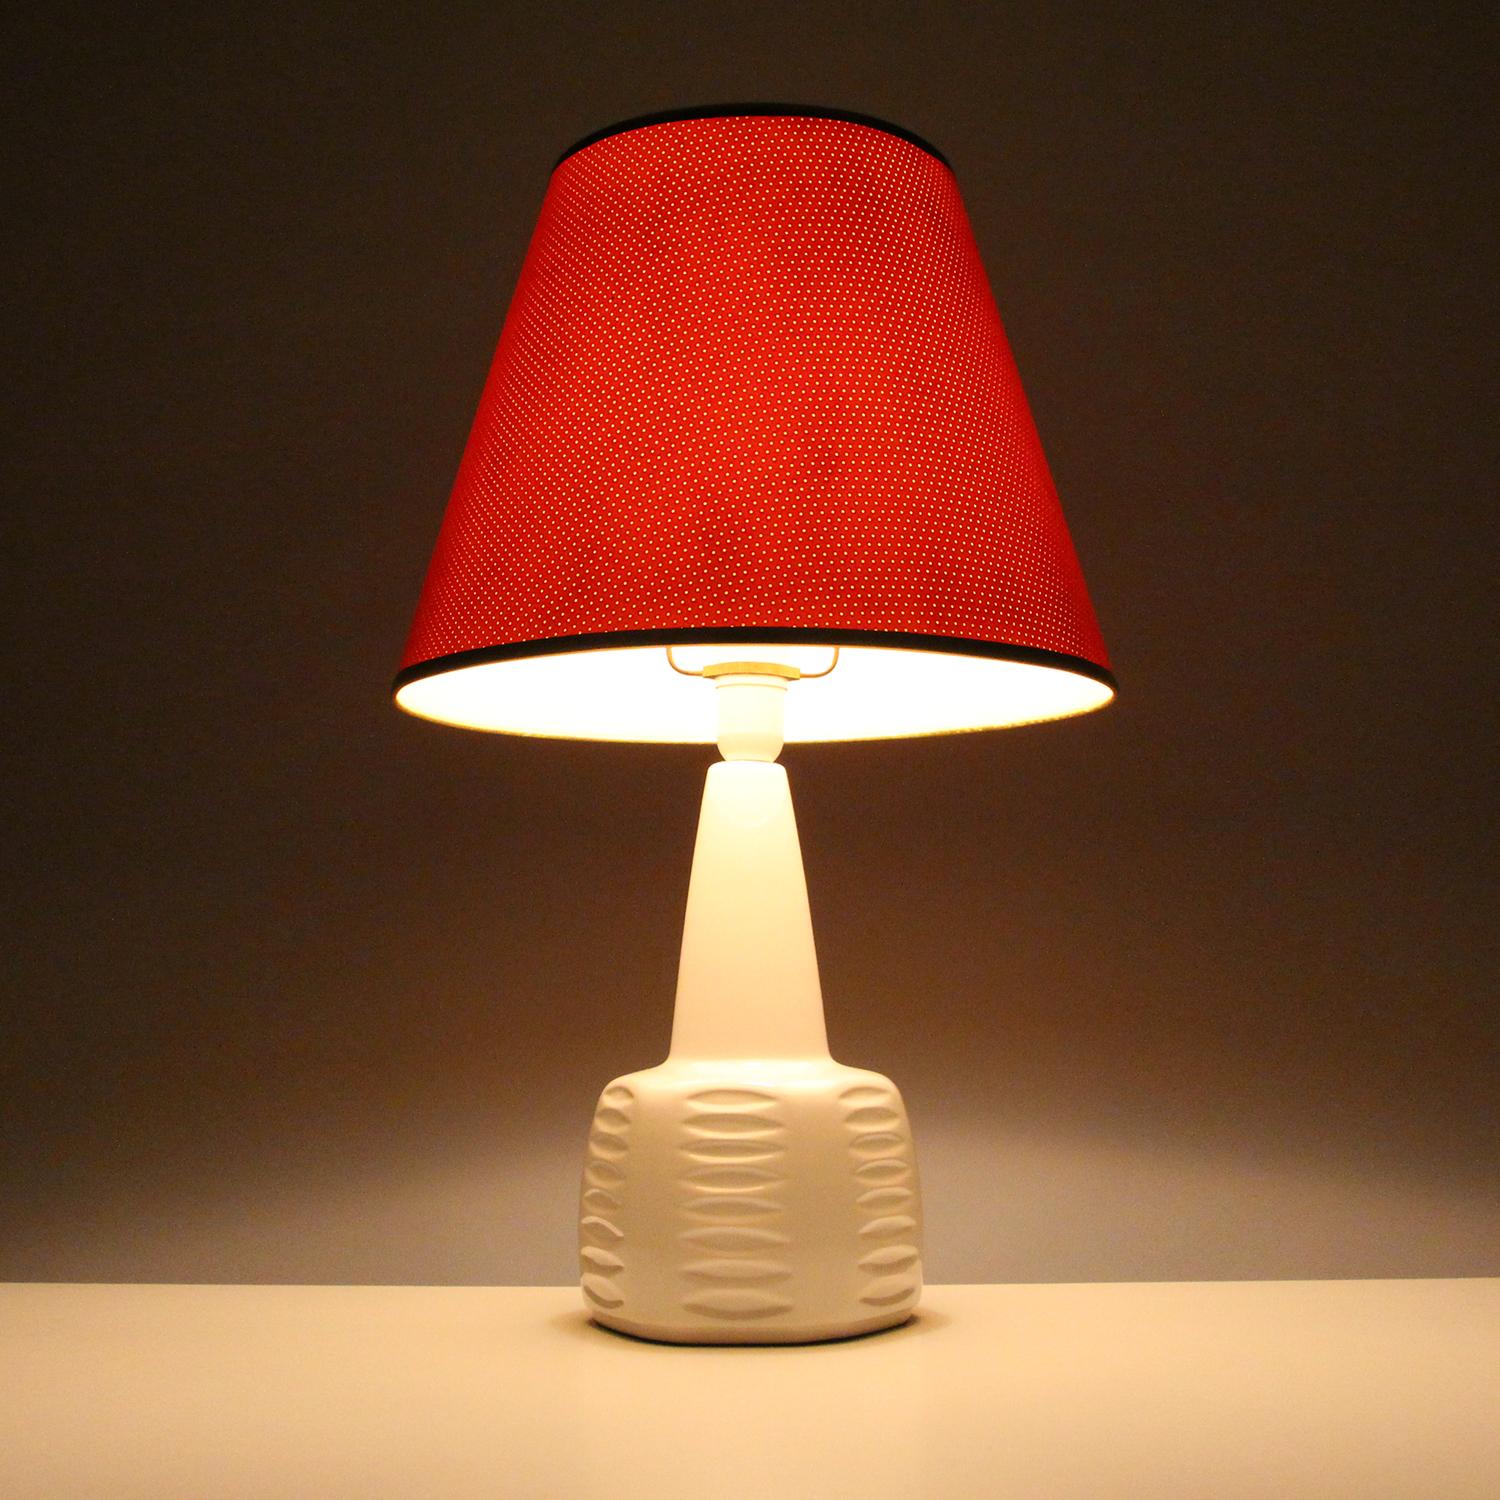 Danish White Ceramic Table Lamp by Einar Johansen for Soholm 1960s with Shade Included For Sale